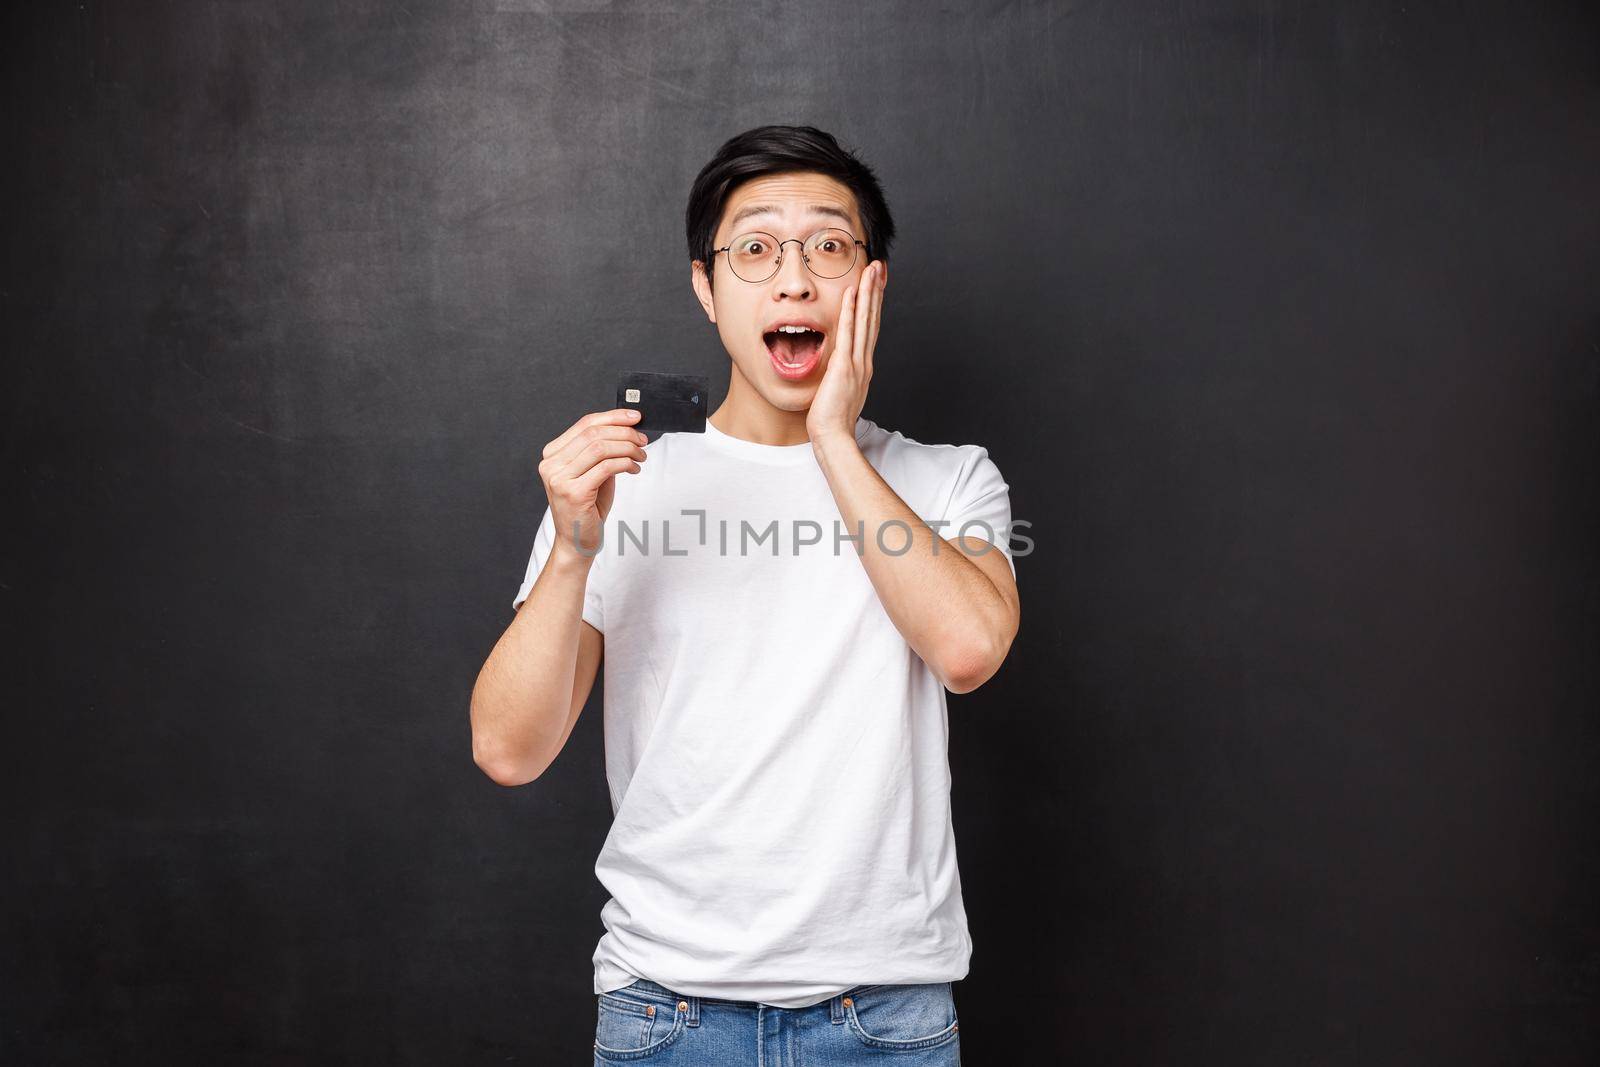 Bank, finance and payment concept. Portrait of excited and amused asian man in t-shirt, open mouth fascinated talking about credit card special features, standing black background intrigued.